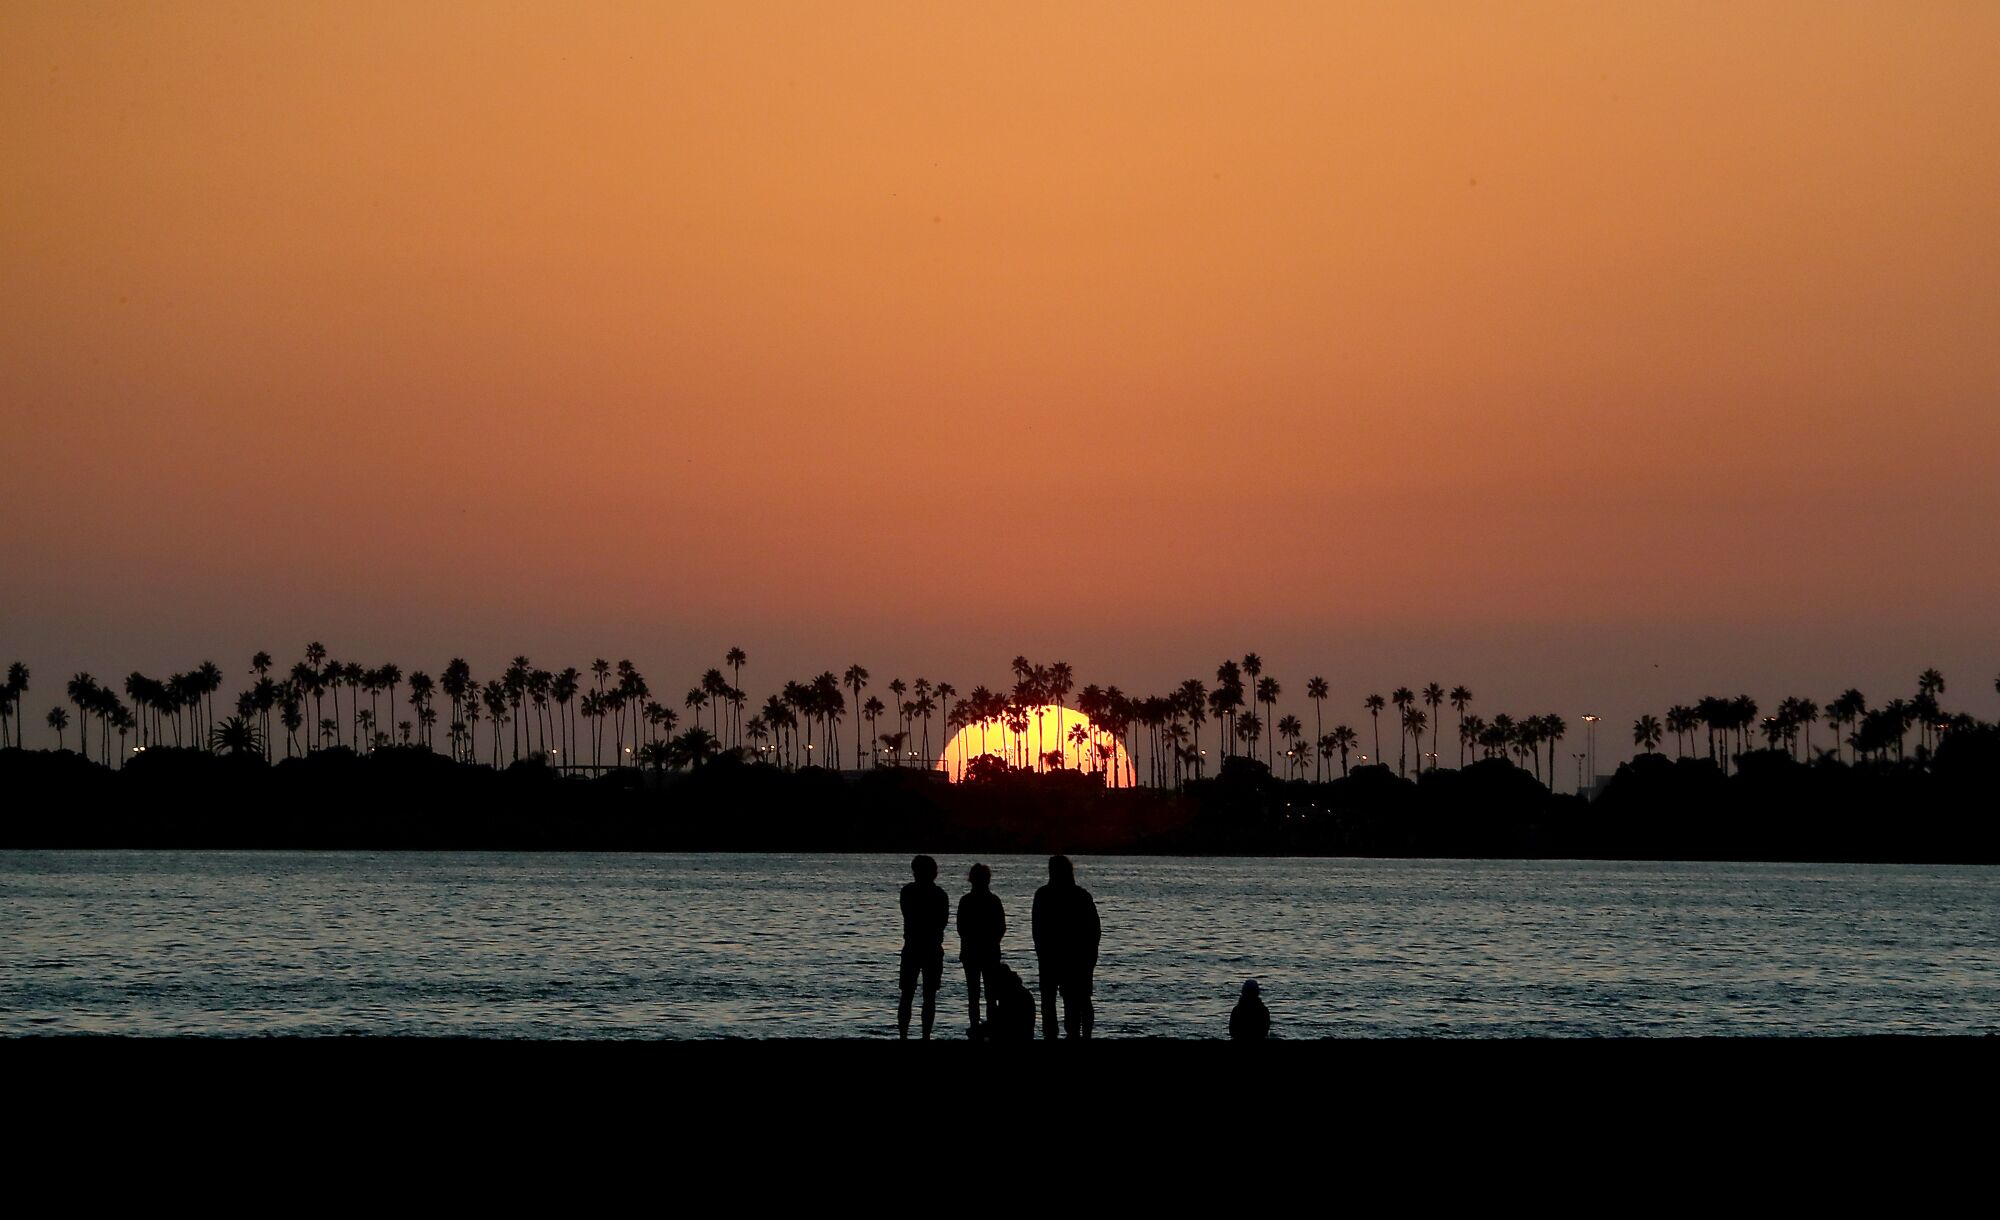 The sun sets behind a long row of palm trees as a group of beachgoers are silhouetted in the foreground